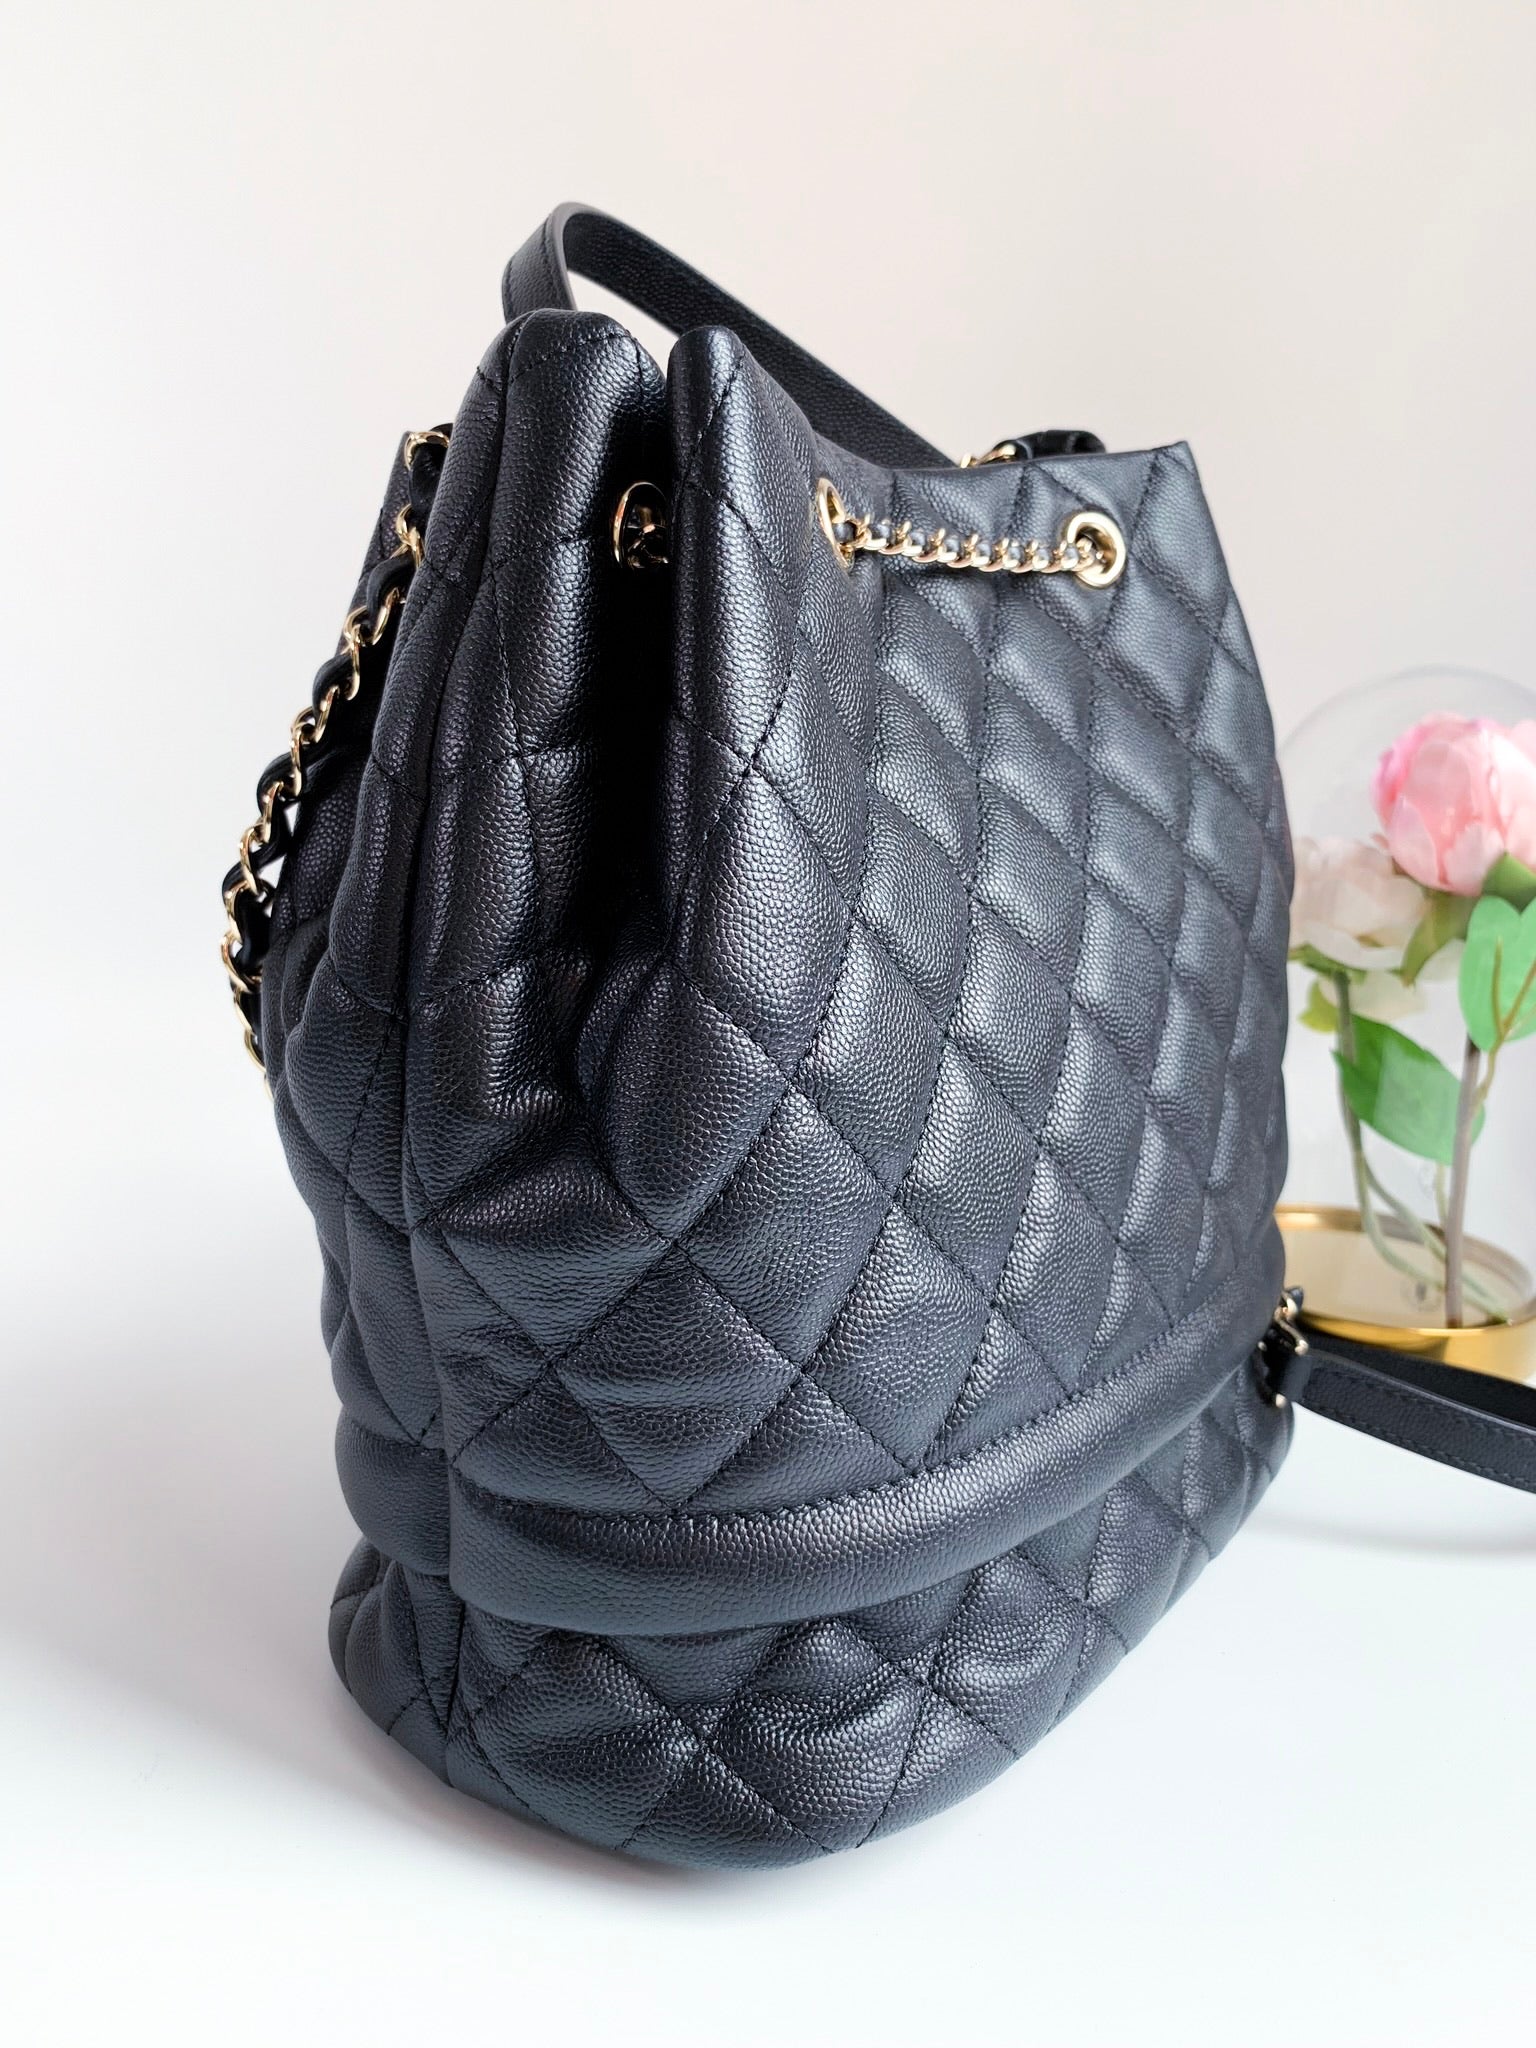 Navy Quilted Caviar Rolled Up Drawstring Bucket Bag Gold Hardware, 2019